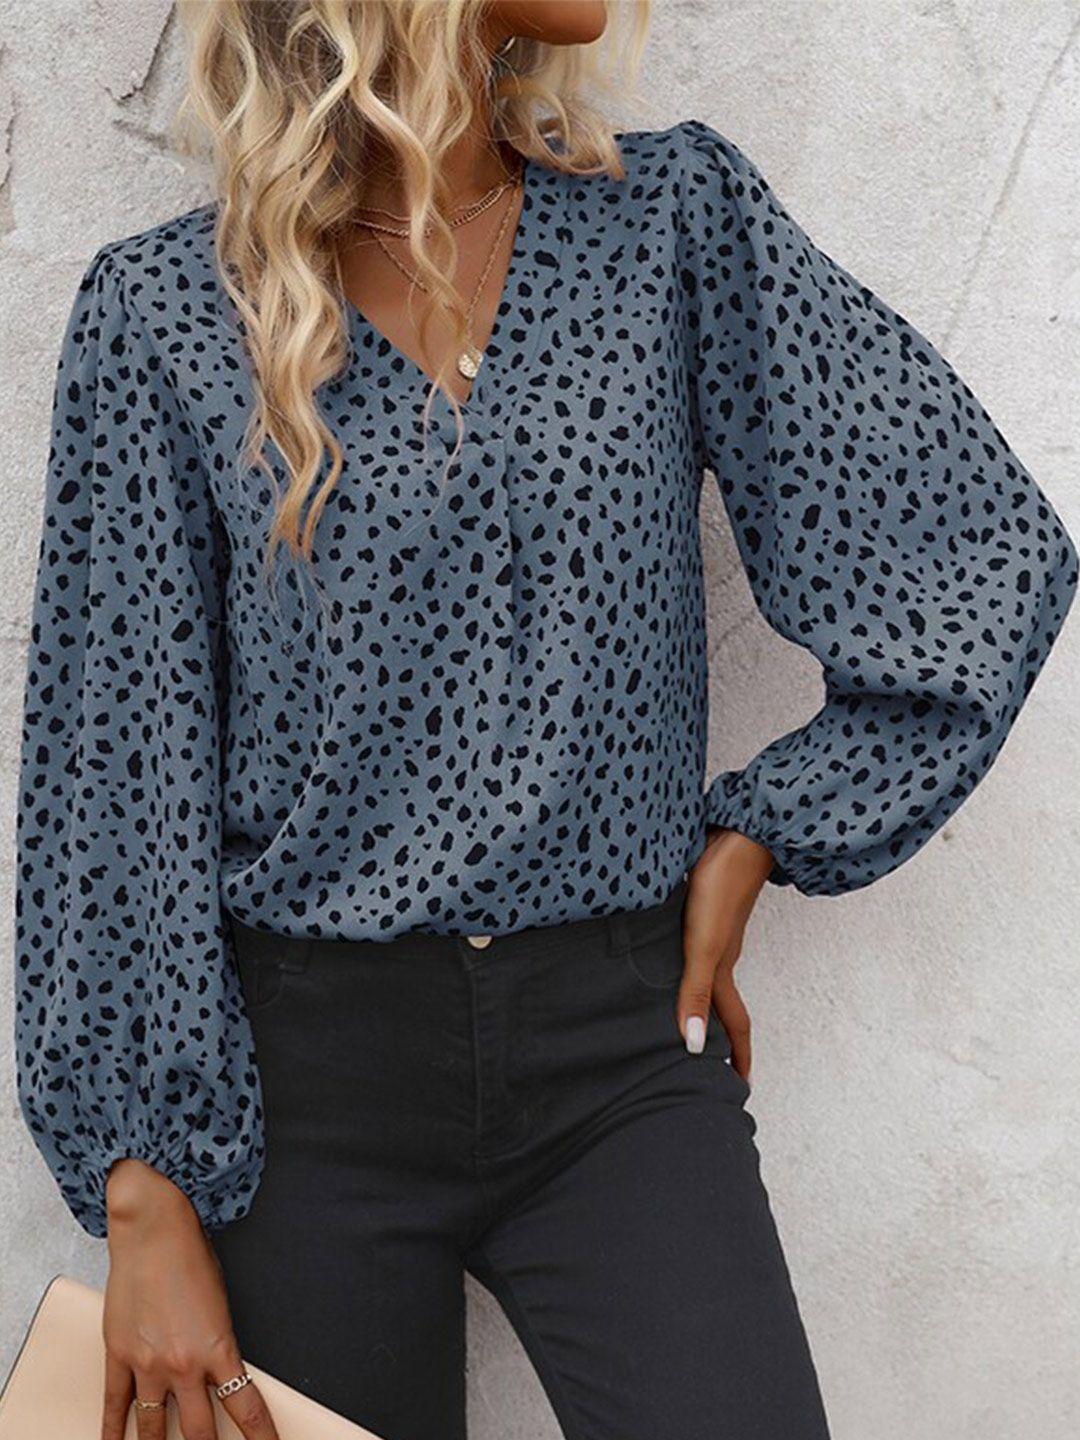 stylecast blue animal printed puff sleeves shirt style top